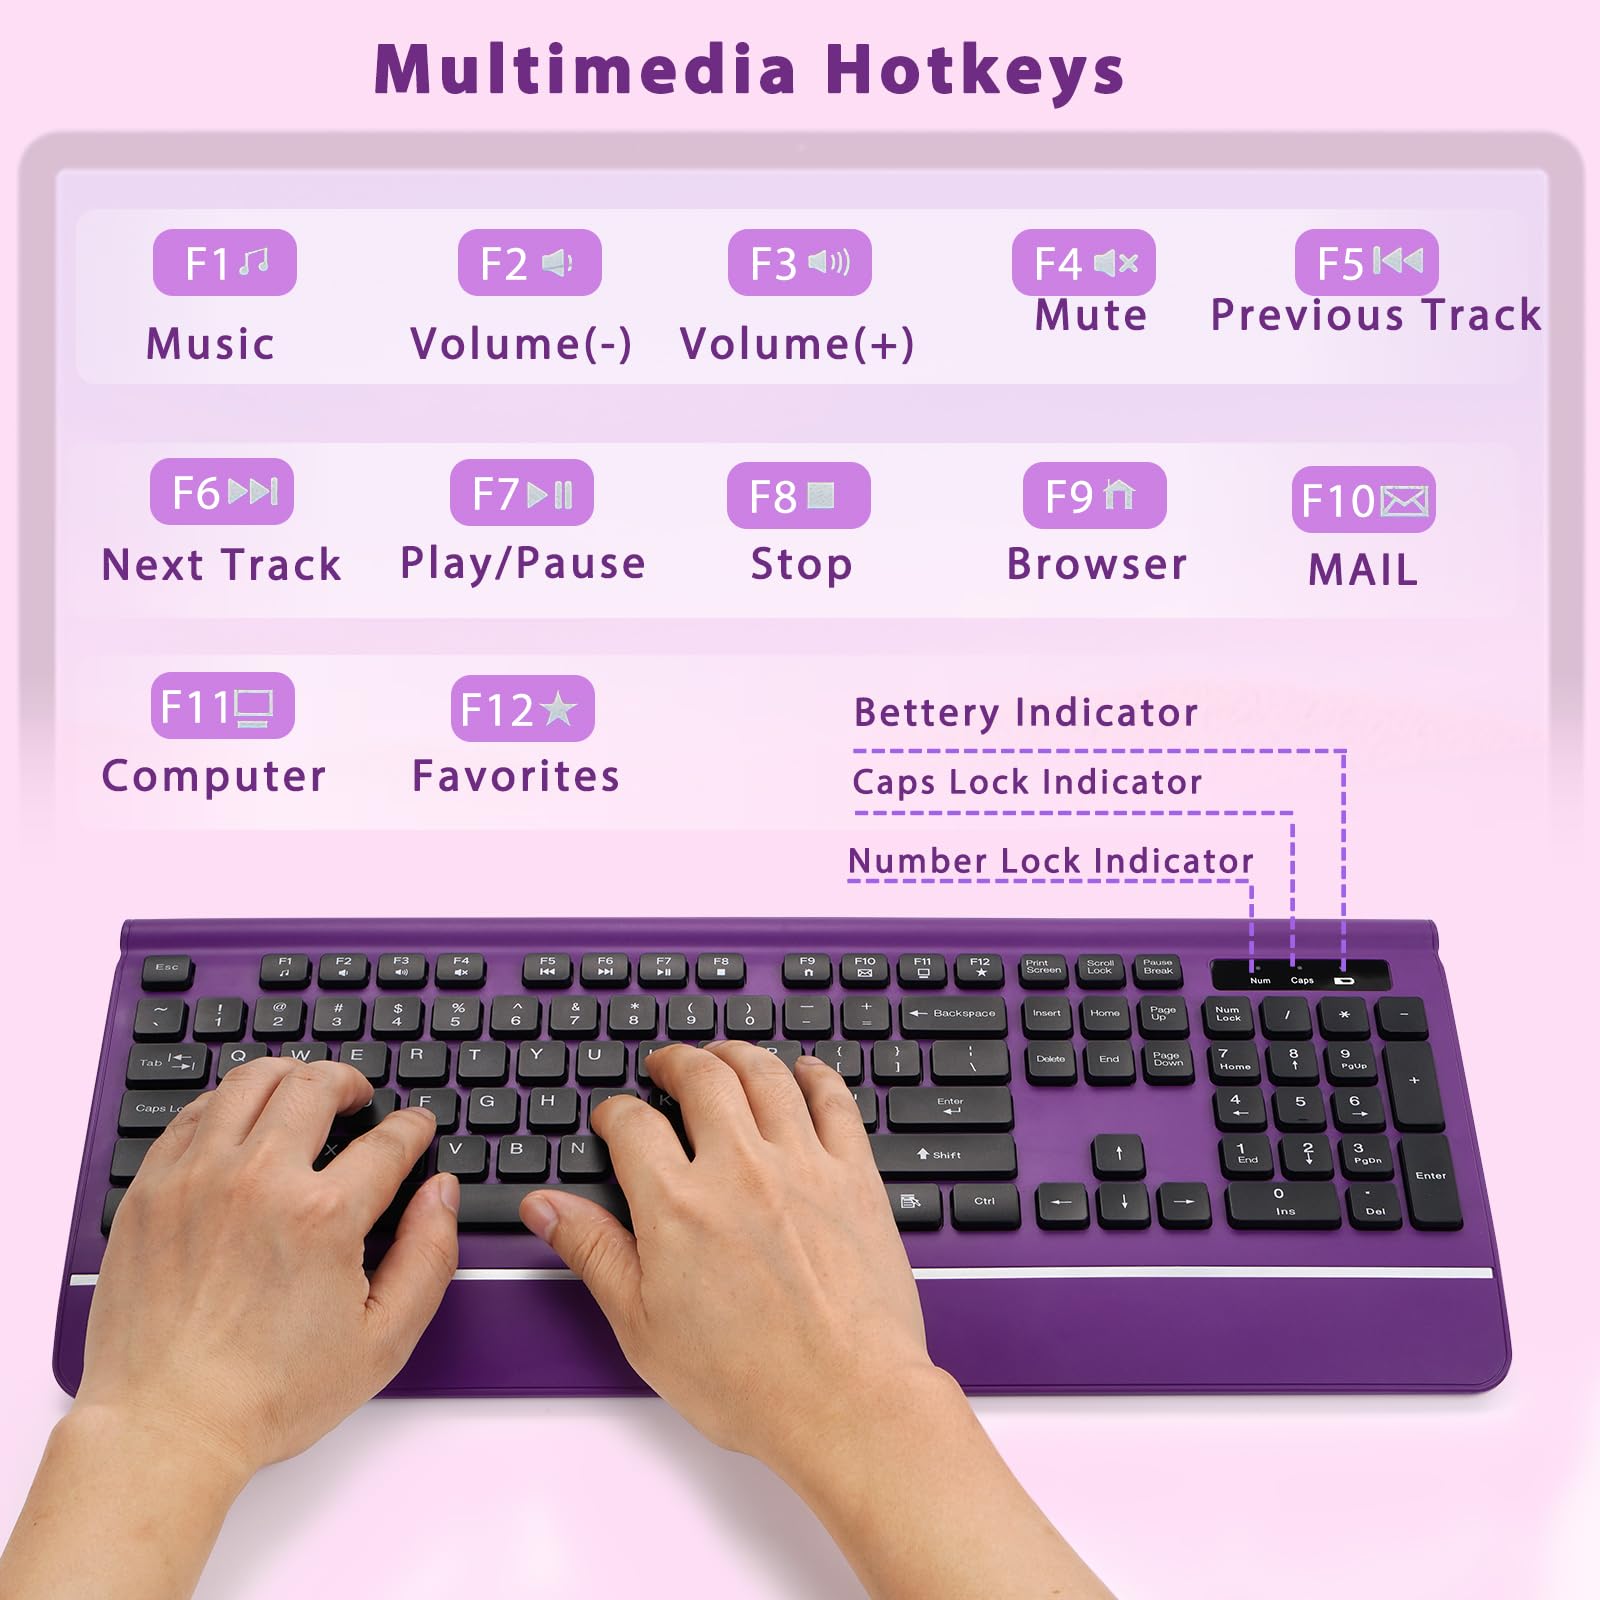 Wireless Keyboard and Mouse, KOPJIPPOM Purple Keyboard and Mouse with Wrist Rest, 2.4G Silent Cordless Full-Size Keyboard Mouse Combo for Windows Computers Desktop, Laptop, PC